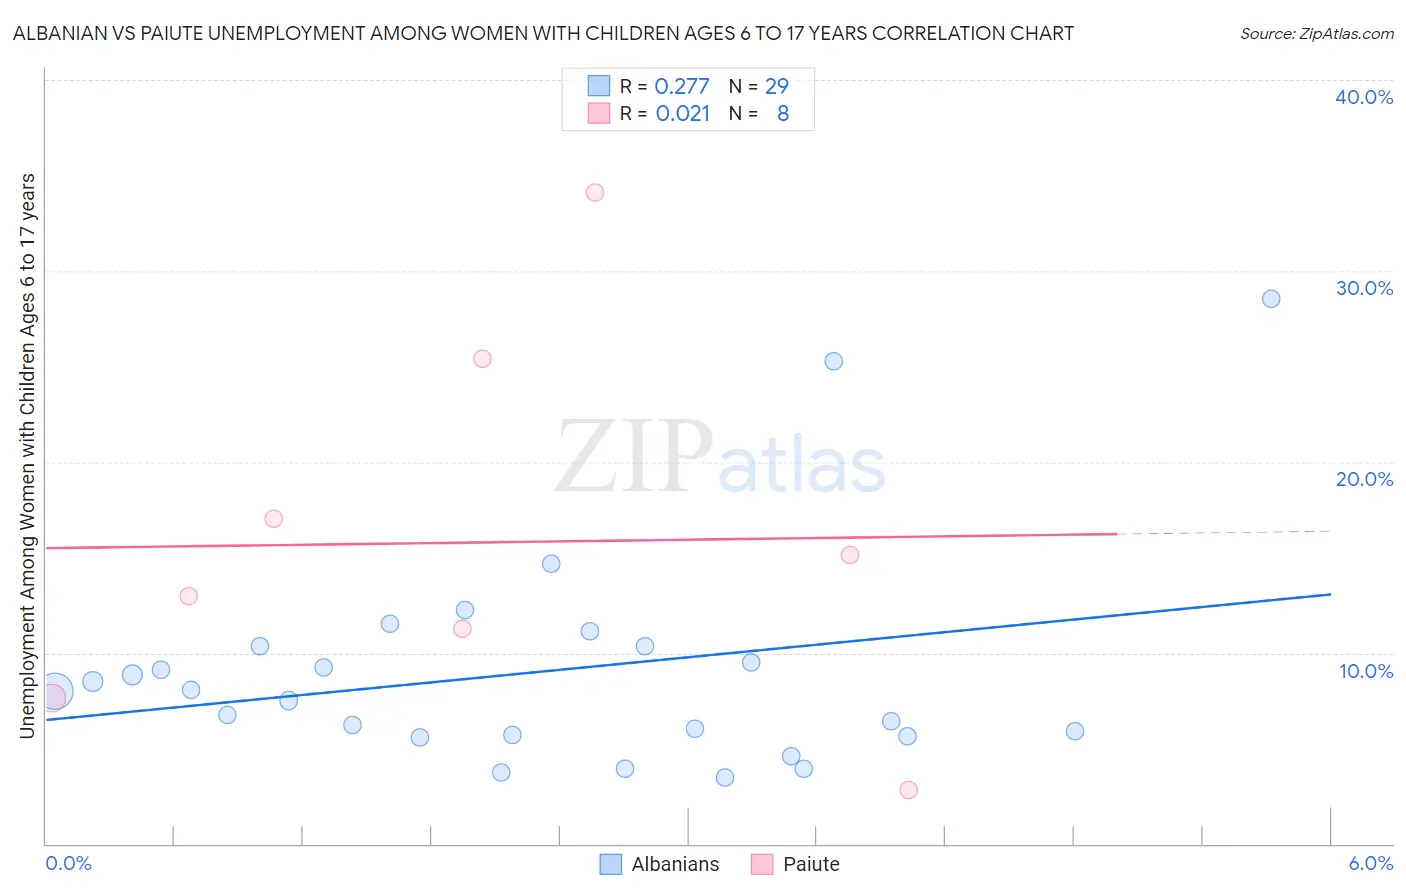 Albanian vs Paiute Unemployment Among Women with Children Ages 6 to 17 years